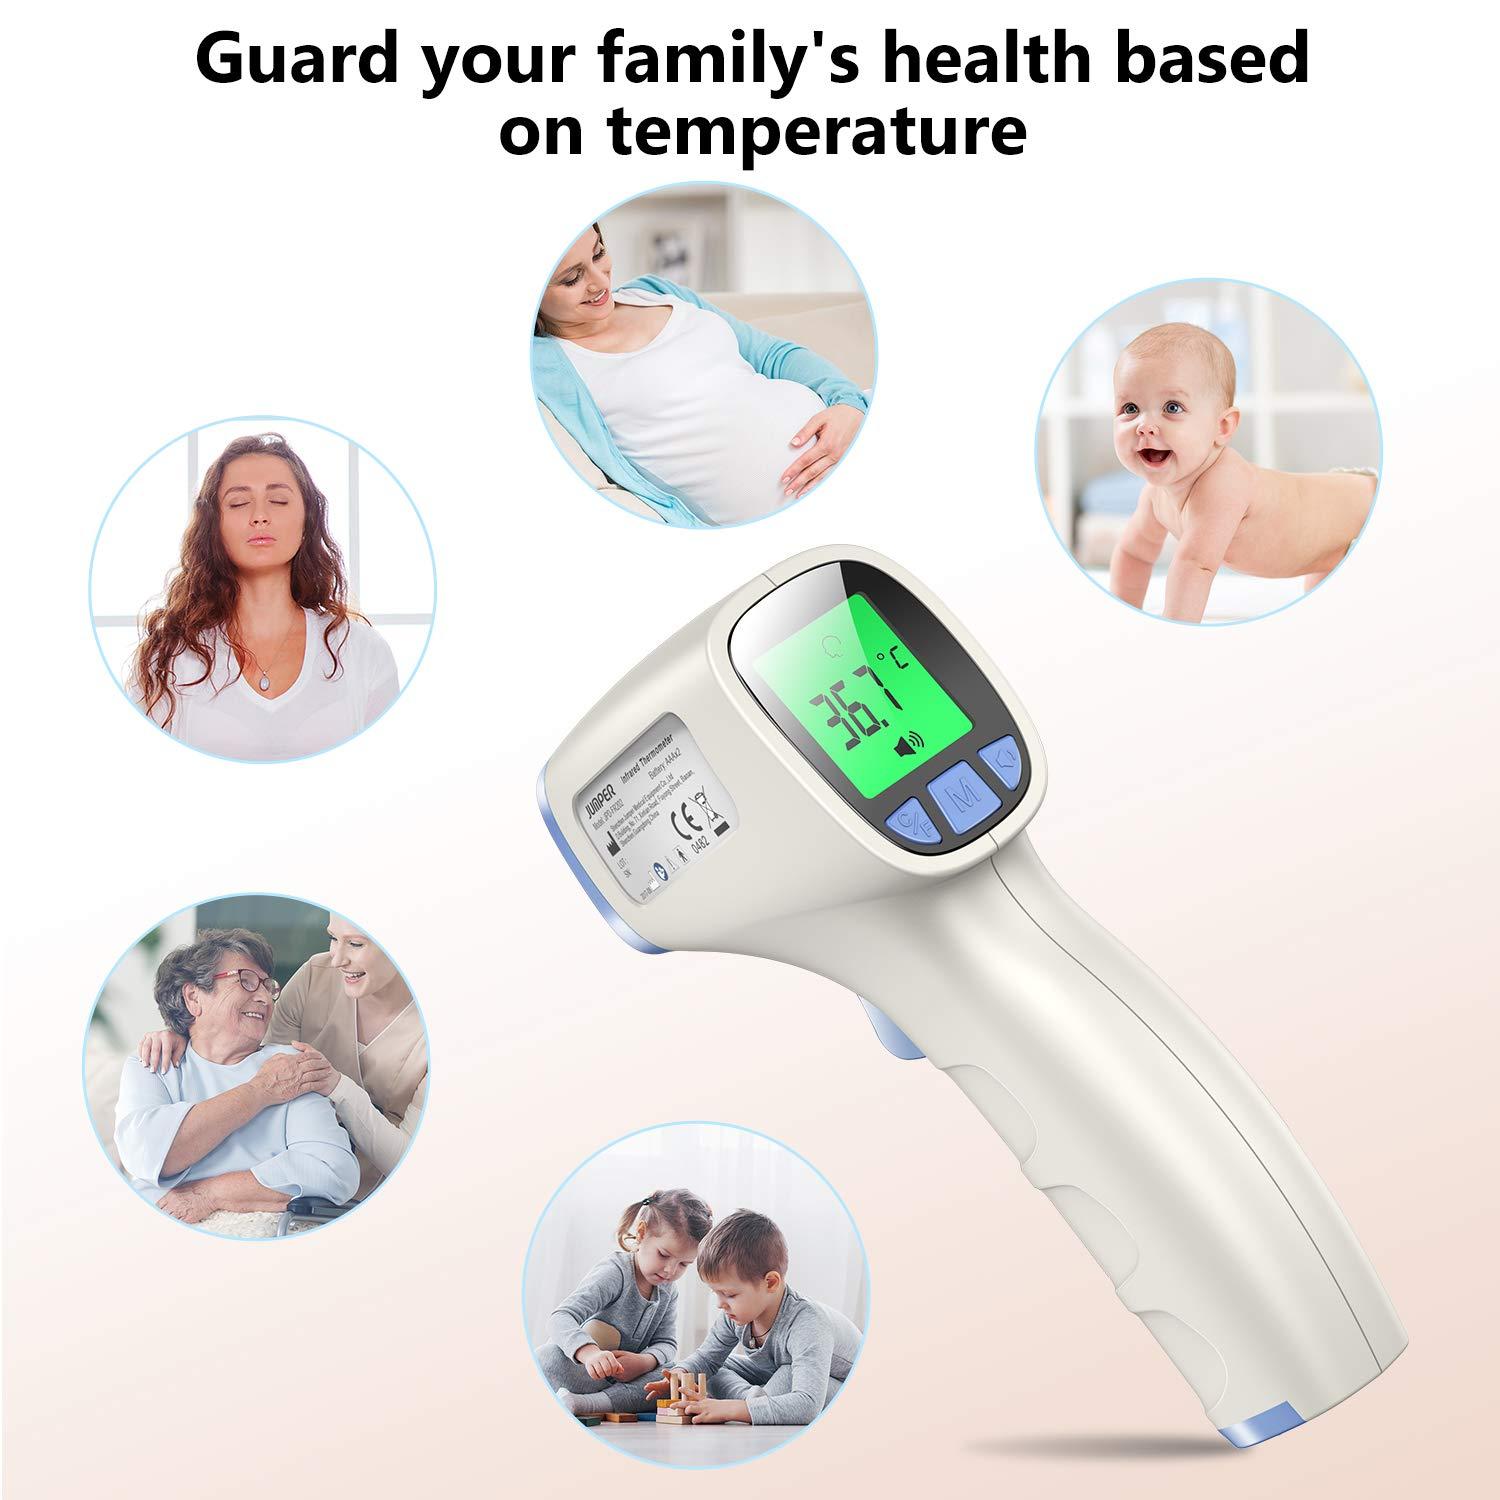 Jumper Health Infrared Thermometer